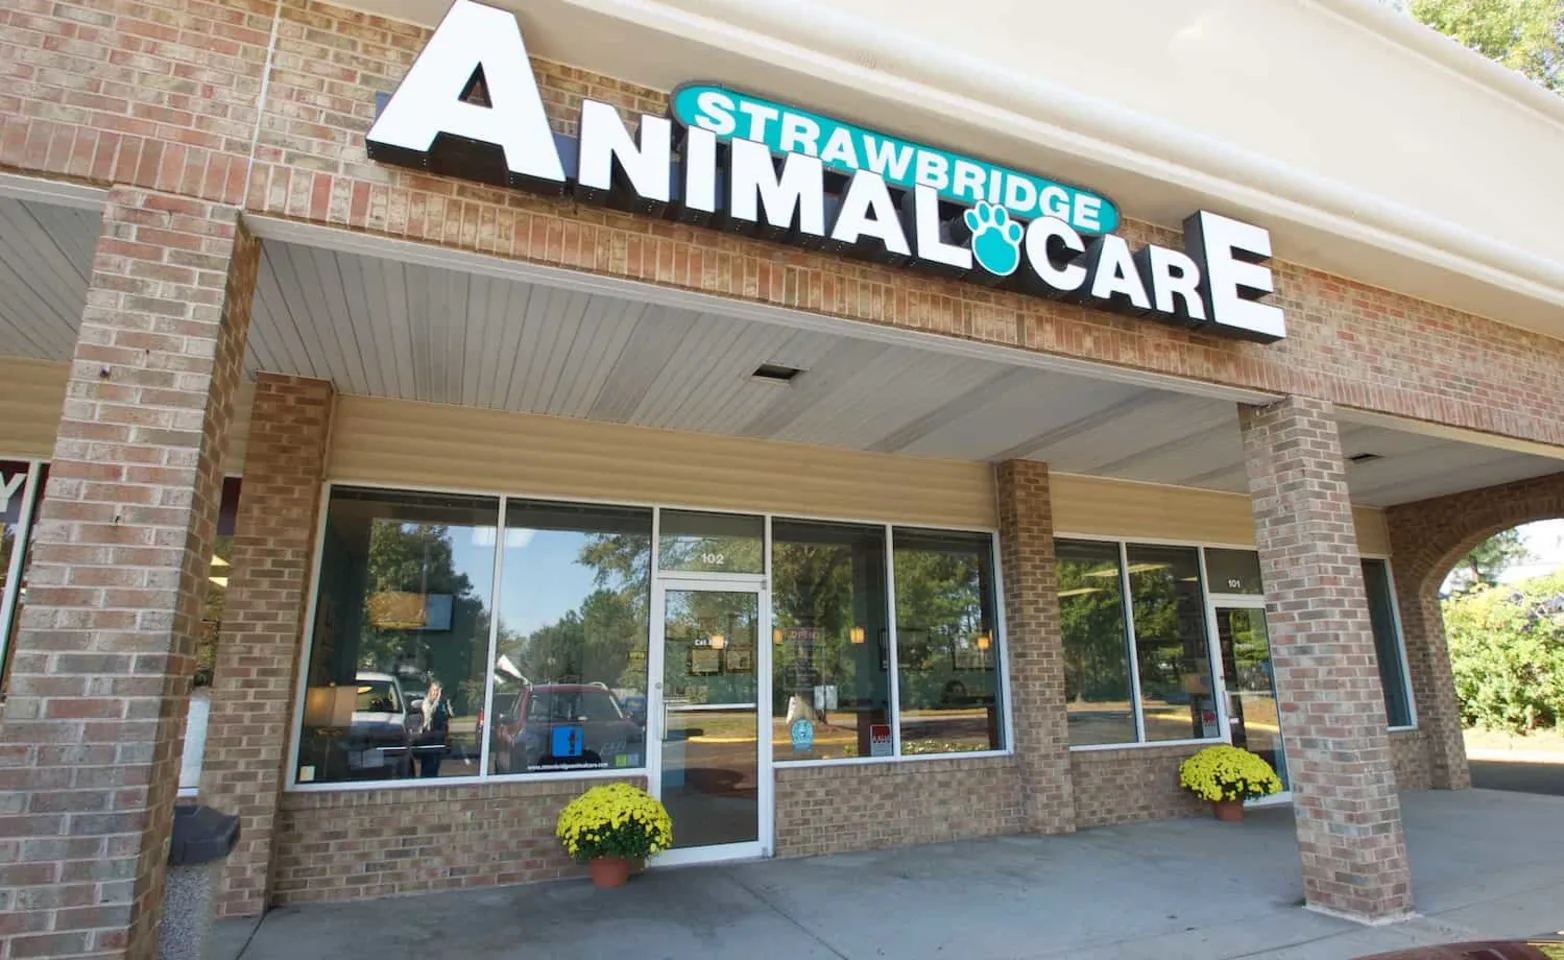 Front Building of Strawbridge Animal Care where they are located in a shopping area.